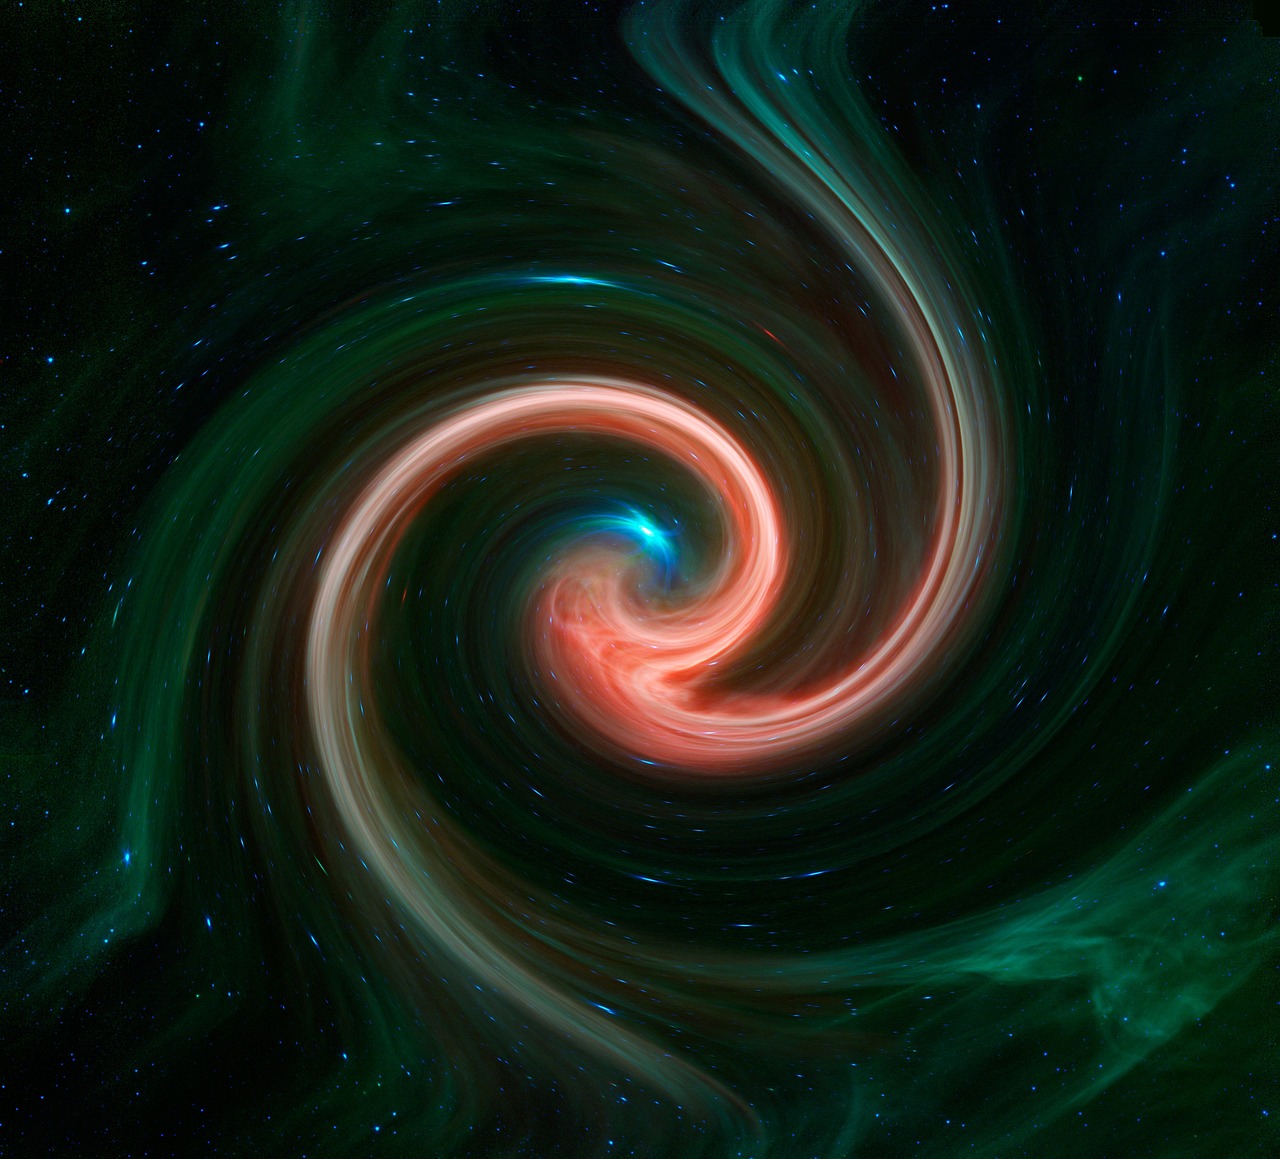 an image of a spiral in the sky, a digital rendering, space art, pulsar, hubble photo, high definition screenshot